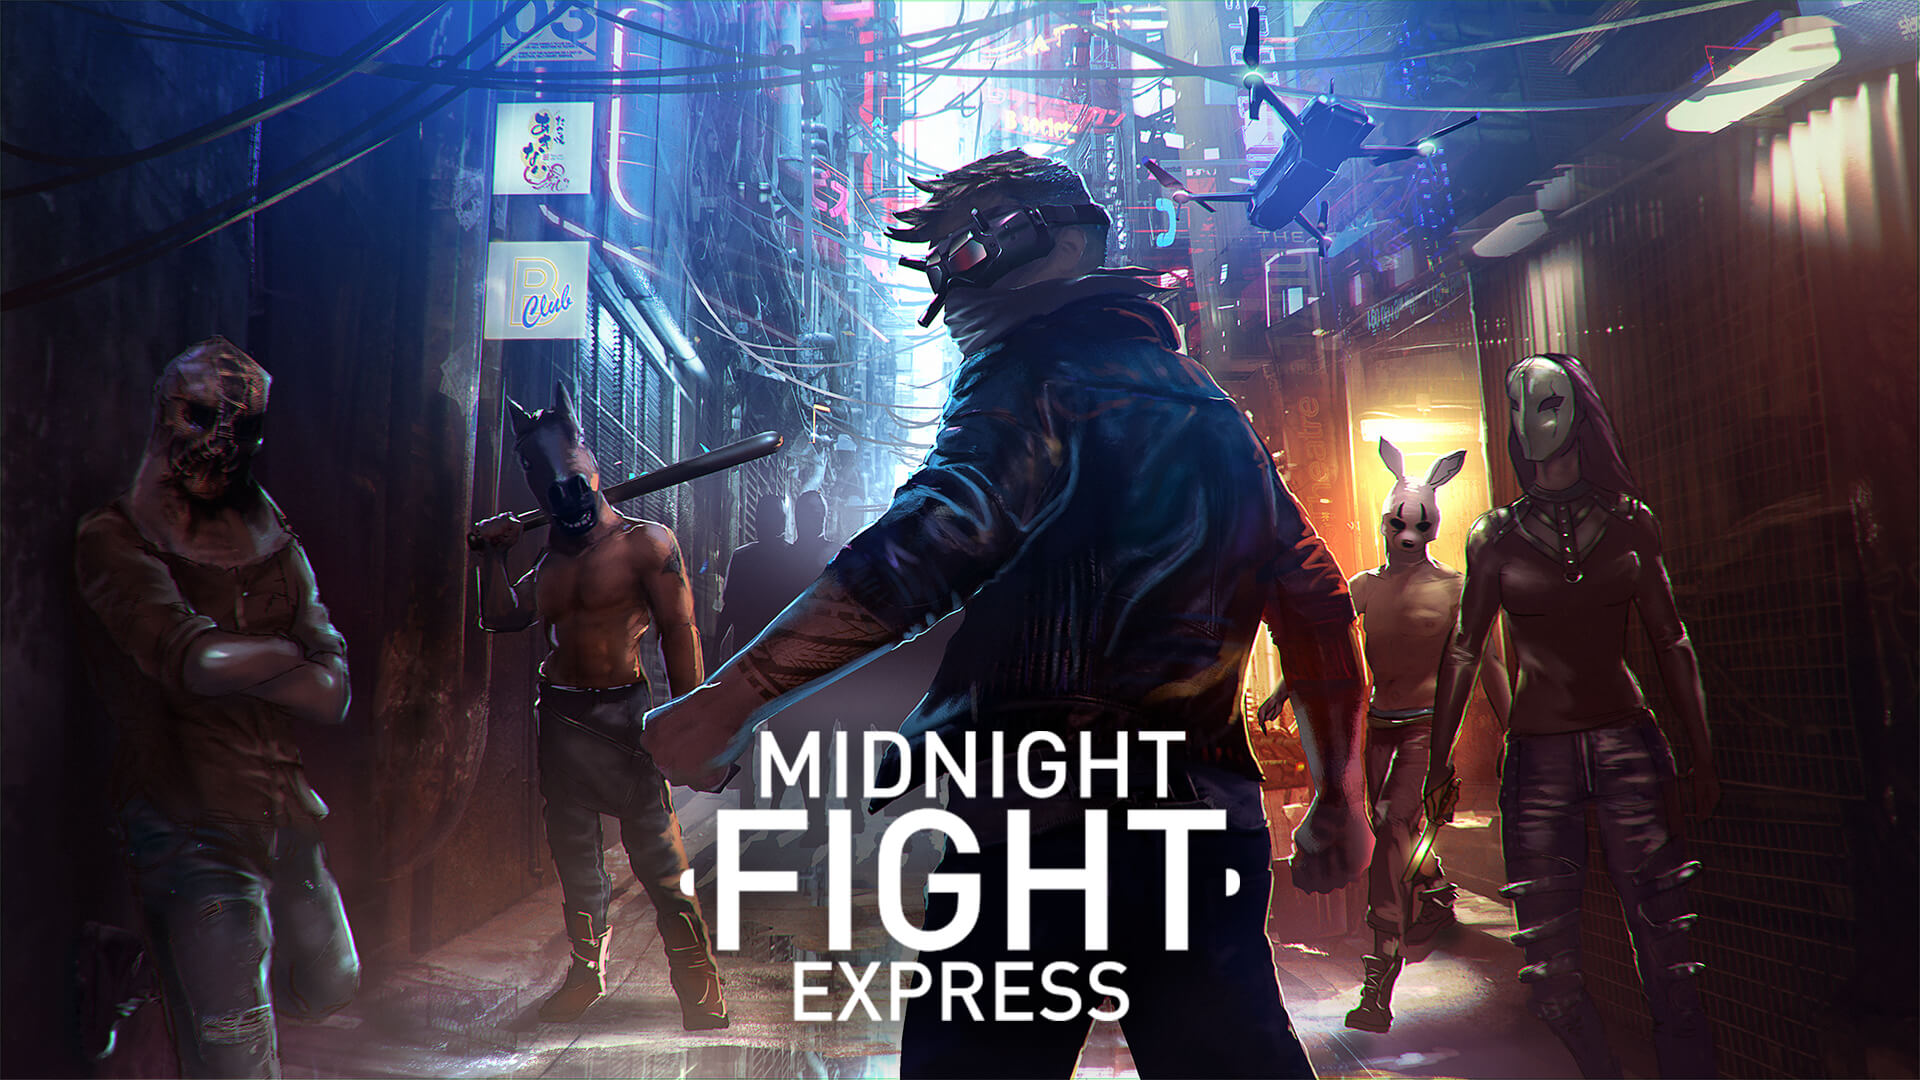 midnight fight express release date announced!